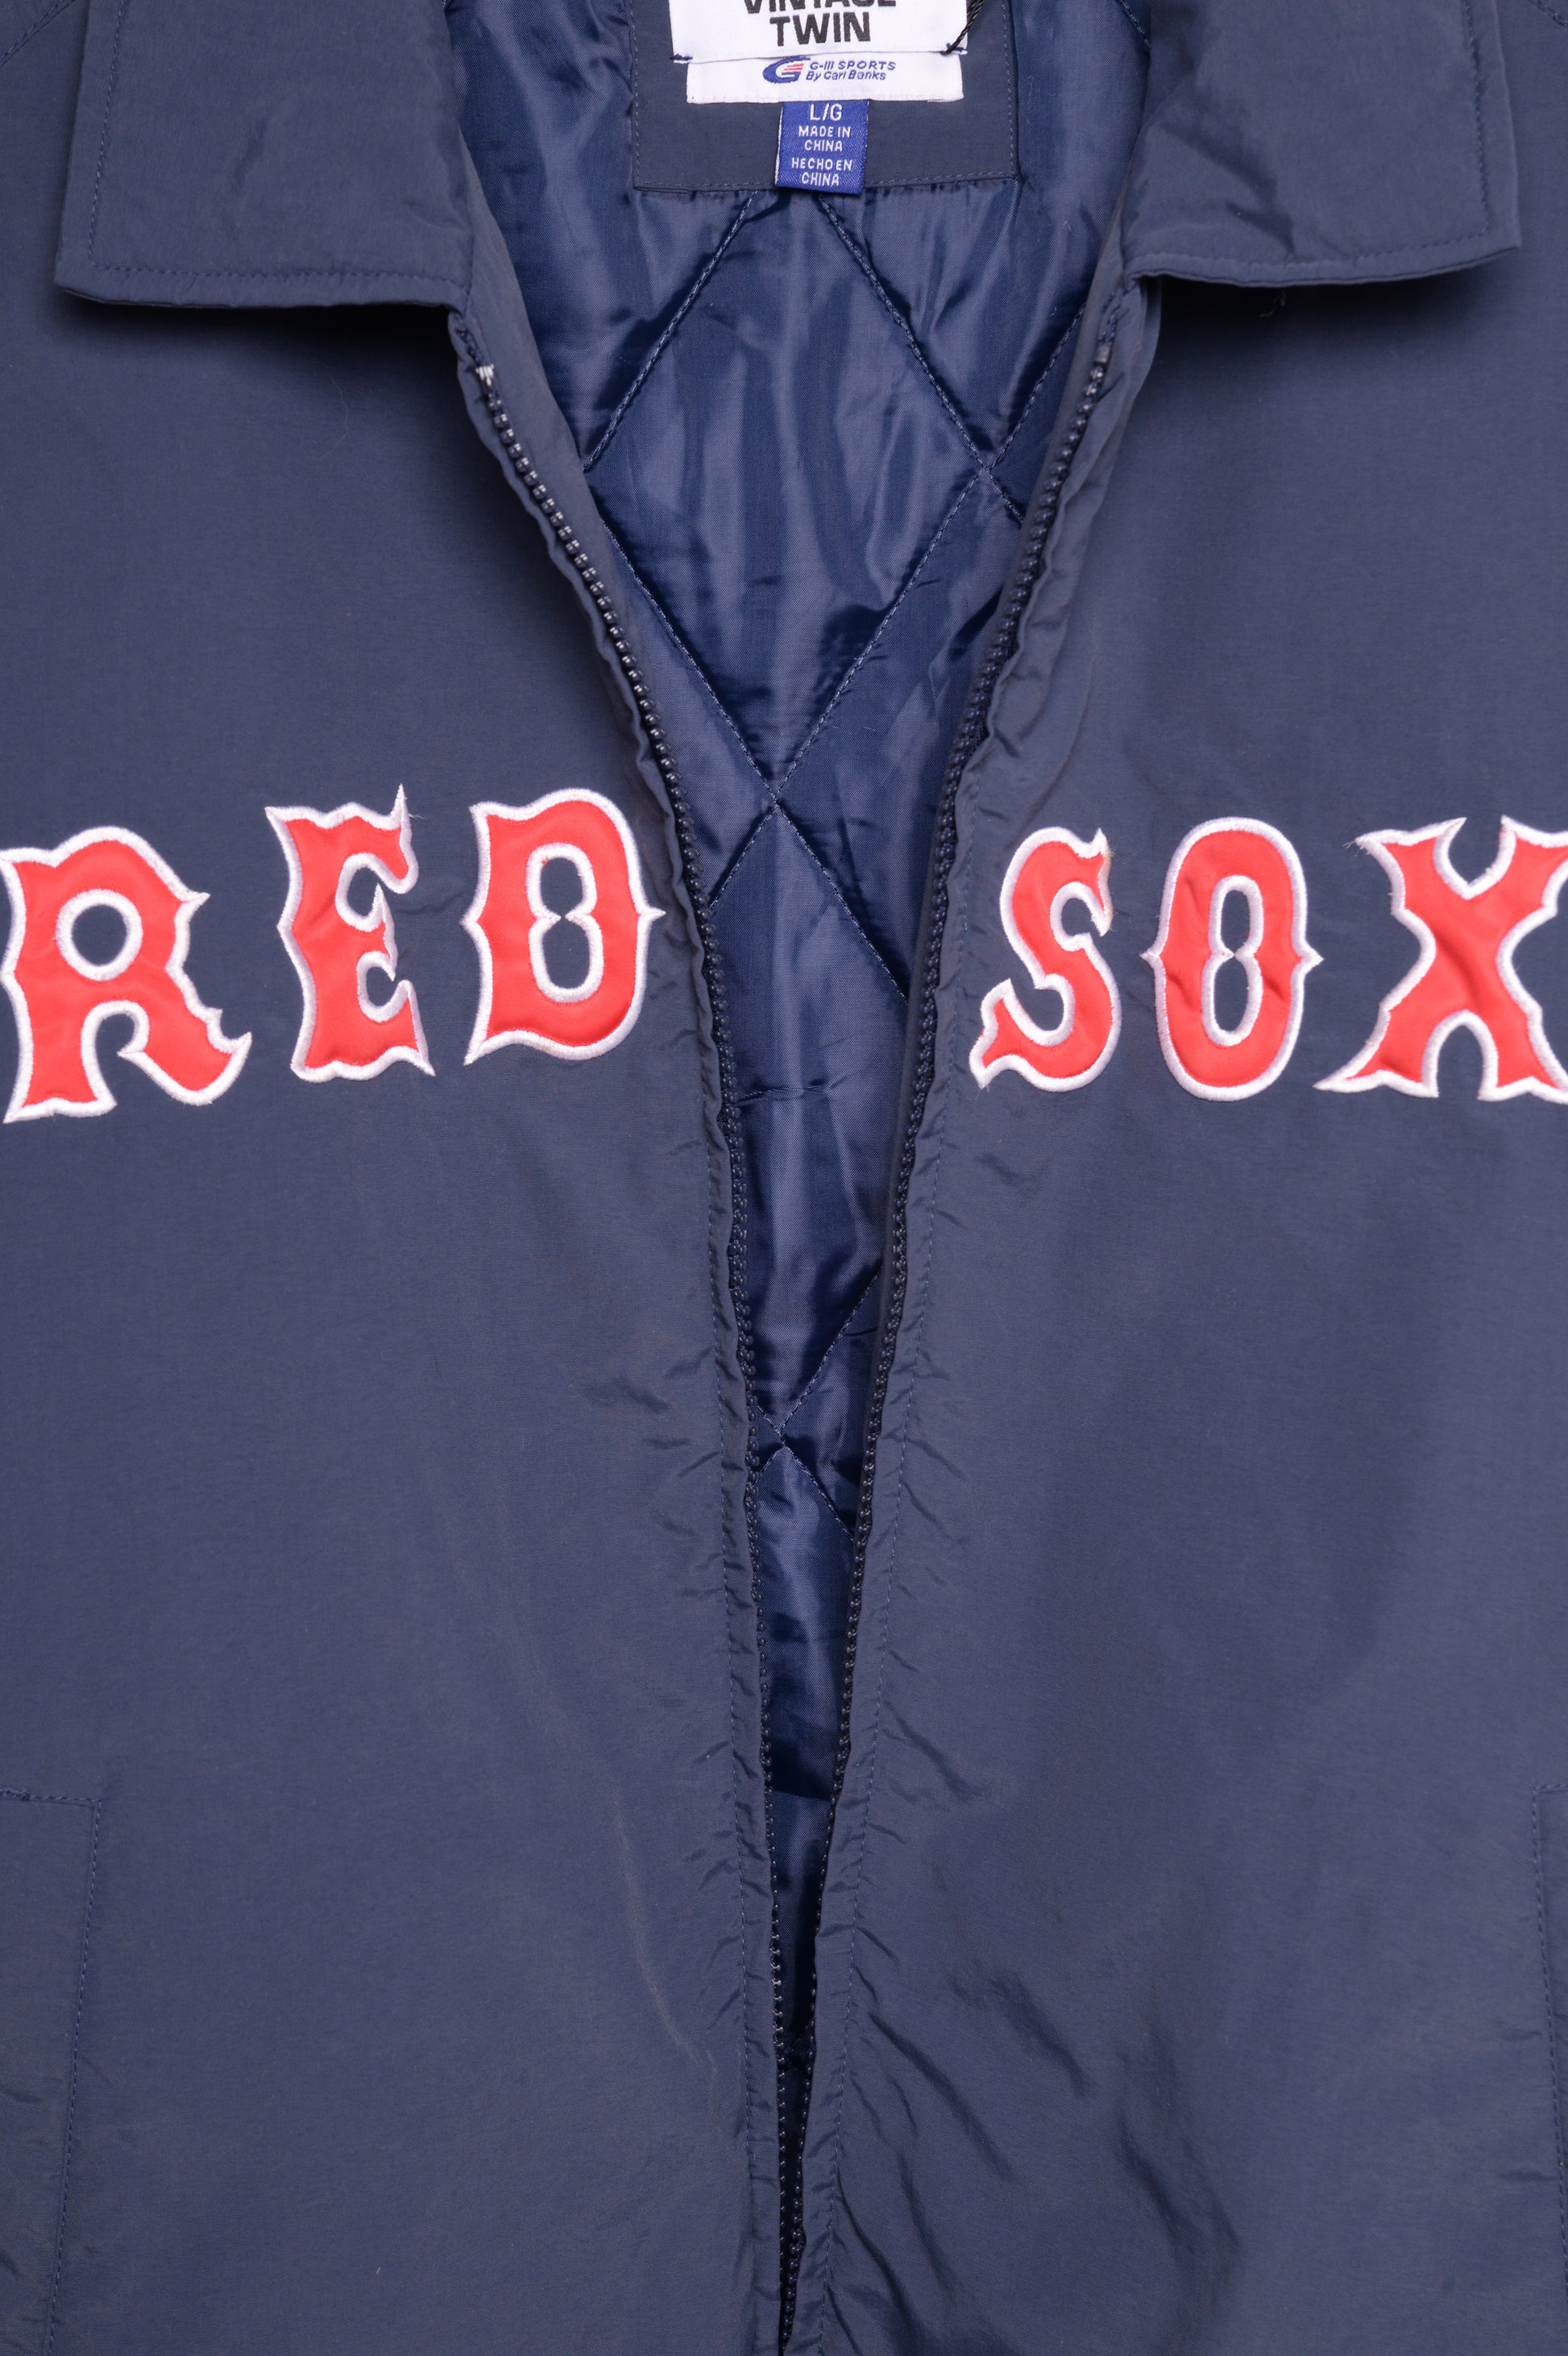 Vintage Boston Red Sox Puffer Jacket - The Vintage Twin